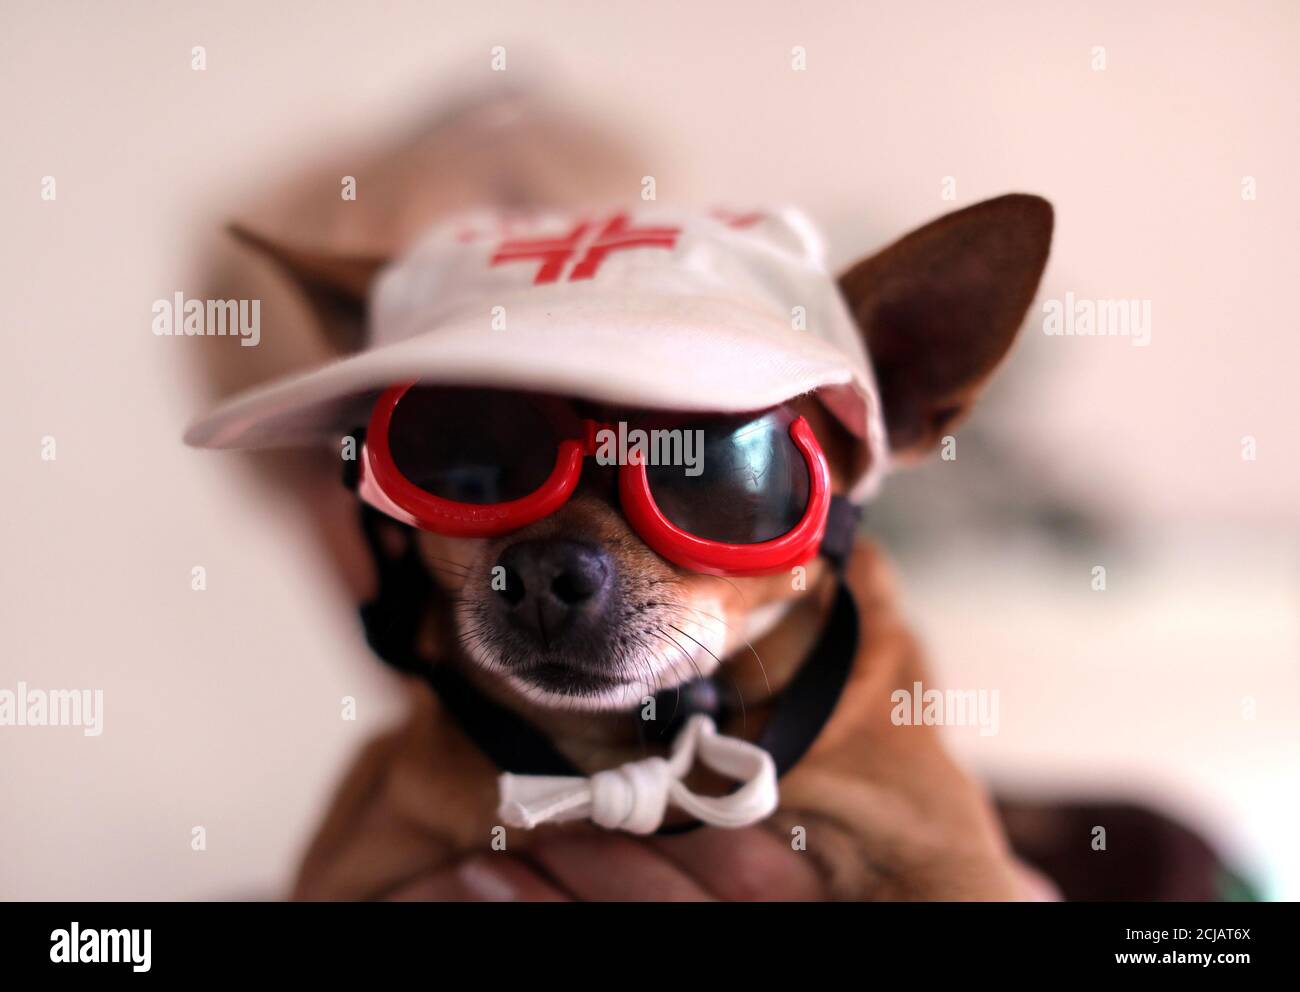 Sezar, a Chihuahua, poses with a cap and sunglasses in Nice, France,  December 7, 2017. REUTERS/Eric Gaillard Stock Photo - Alamy